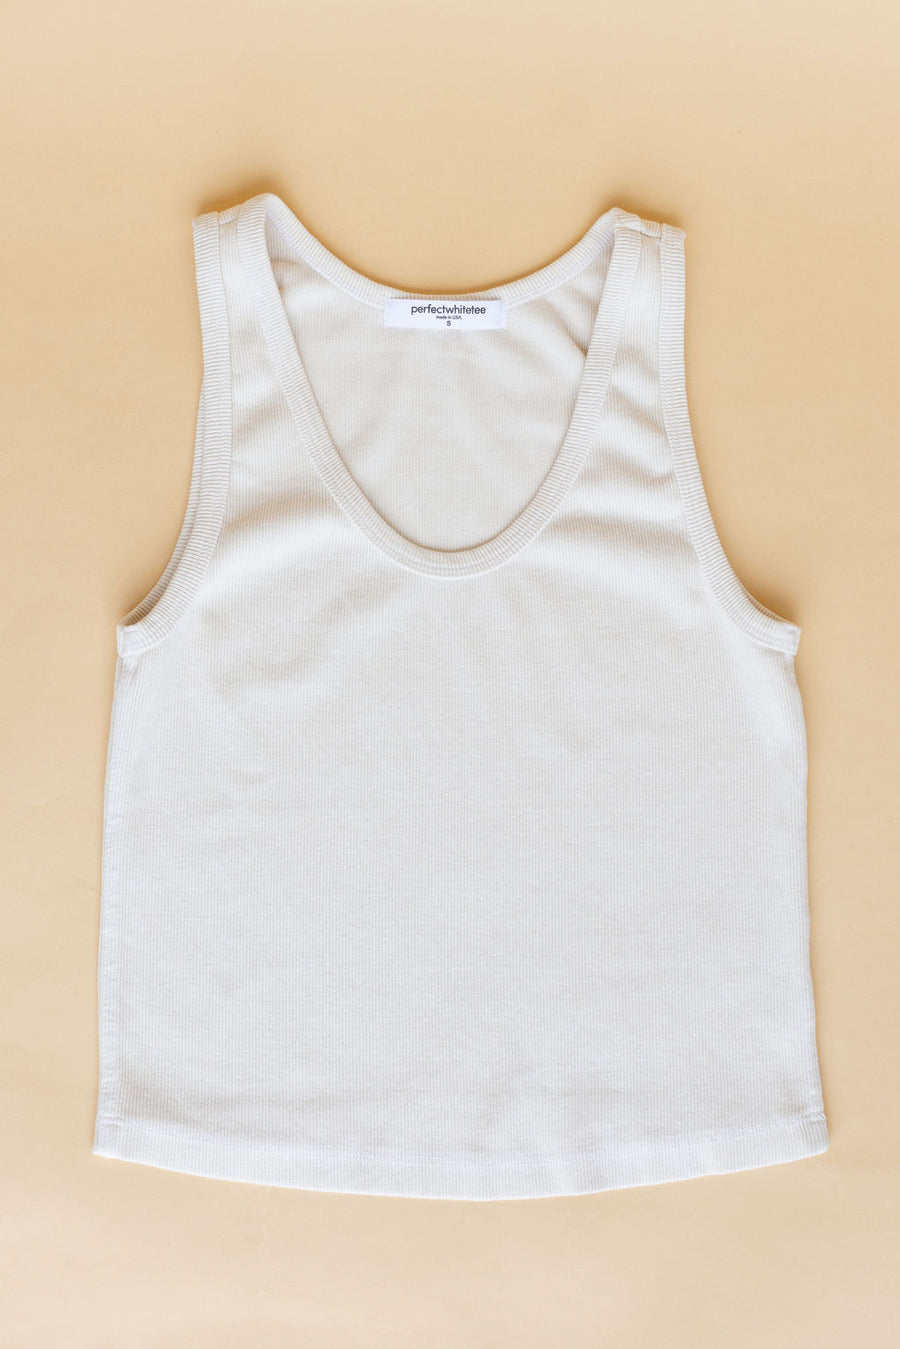 Perfect White Tee | The Blondie Tank